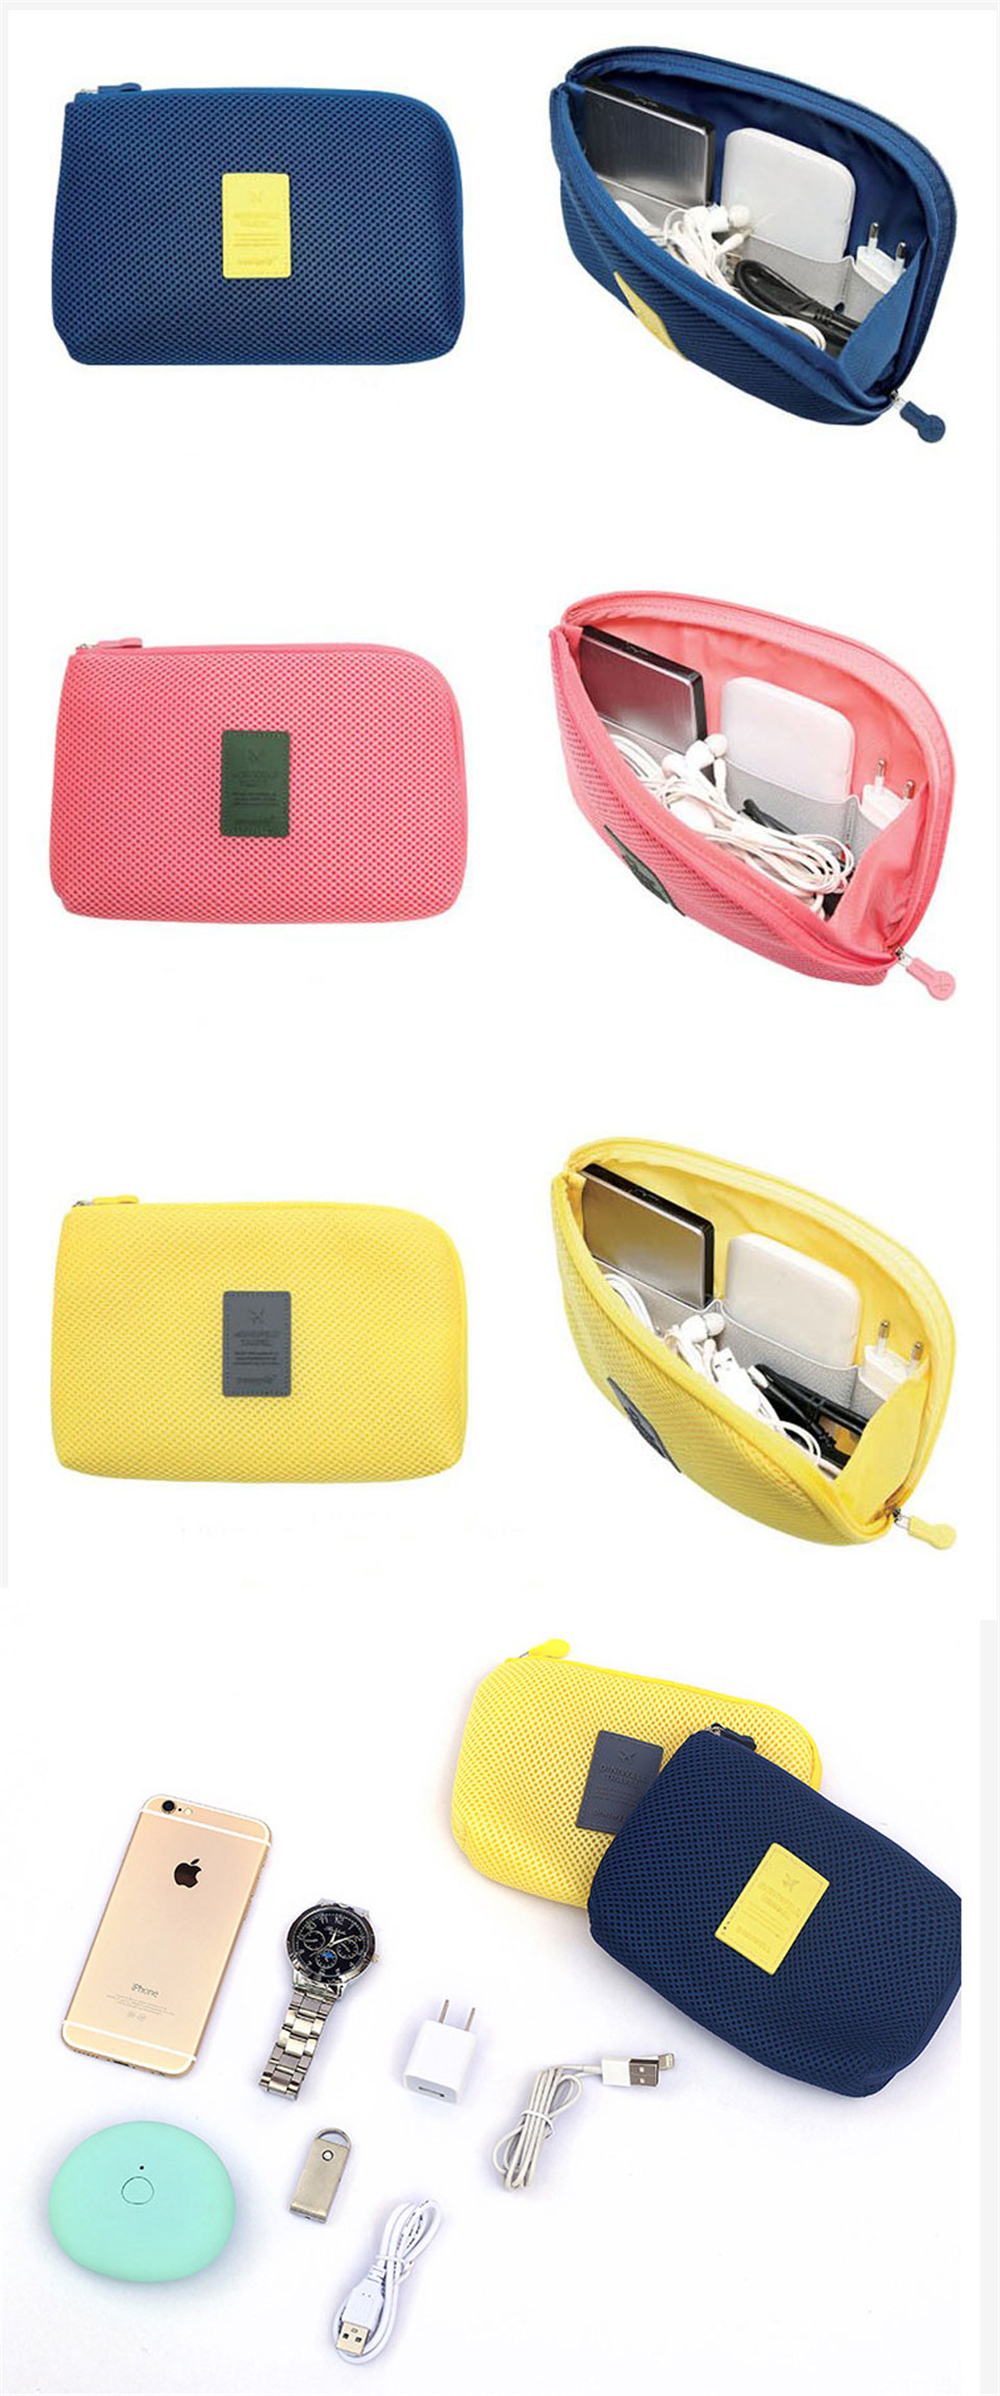 Travel Storage Bag Mesh Cloth for Digital Gadget Cable USB Cable Earphone Pen Cosmetic Bags Organizer Shockproof